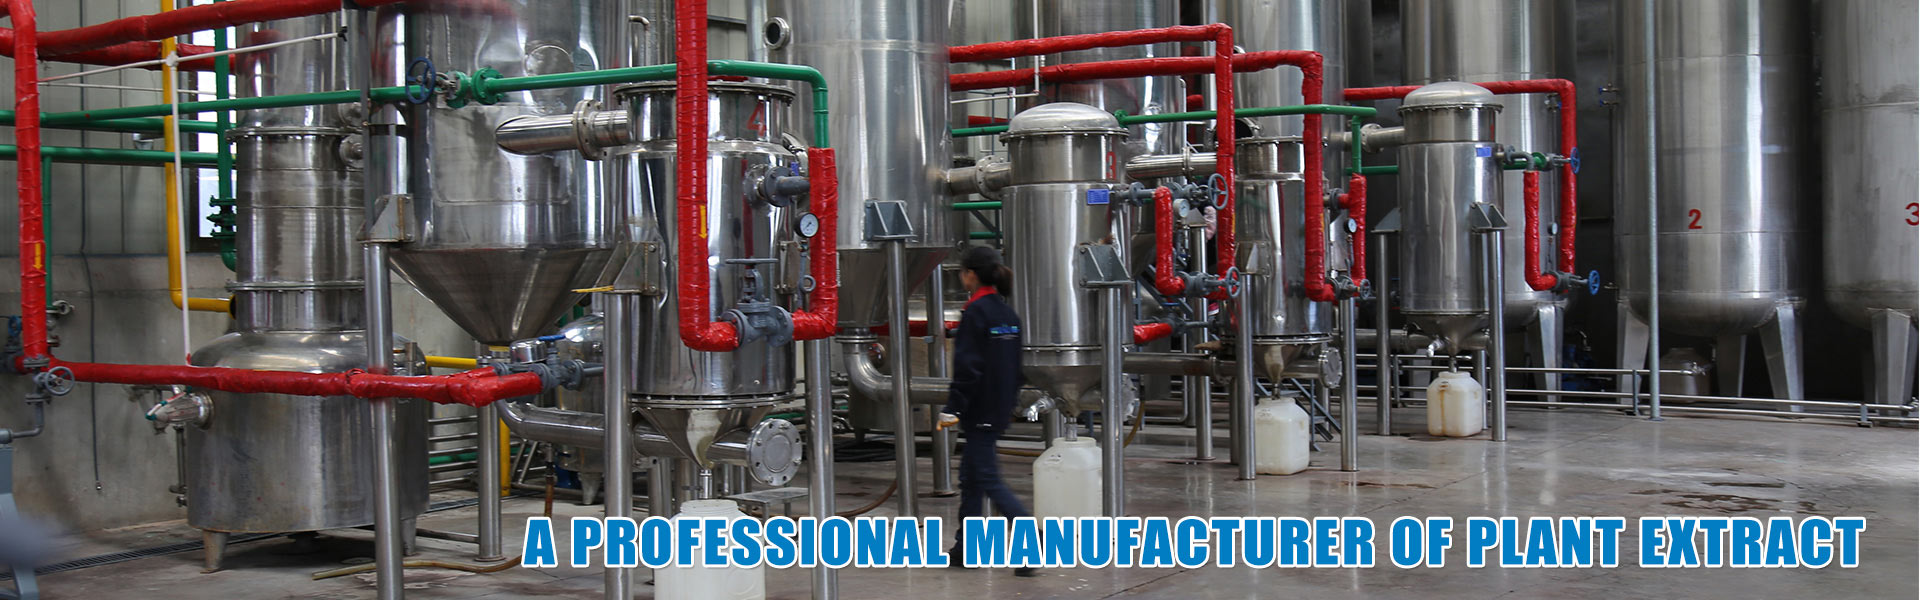 A Professional Manufacturer Of Plant Extract-xuhuang